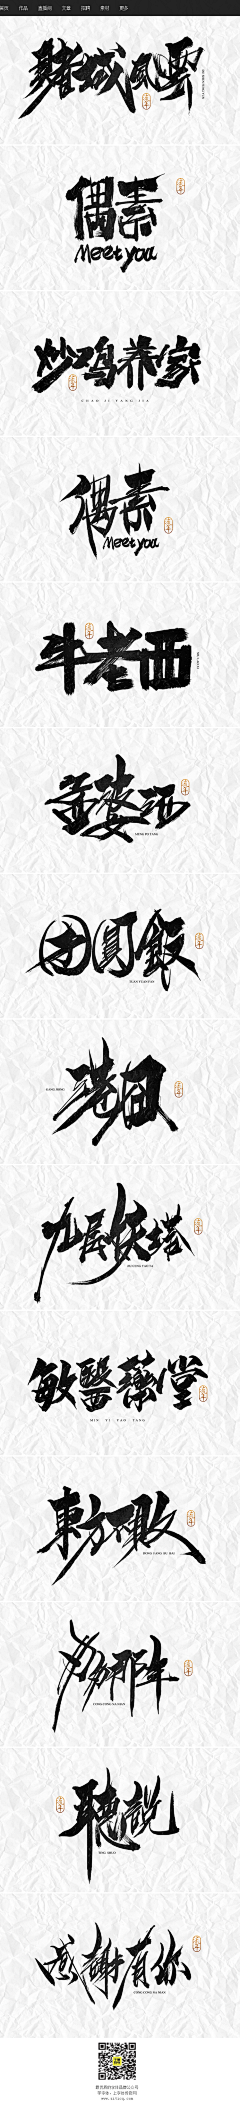 Christopher-Lee采集到字体 